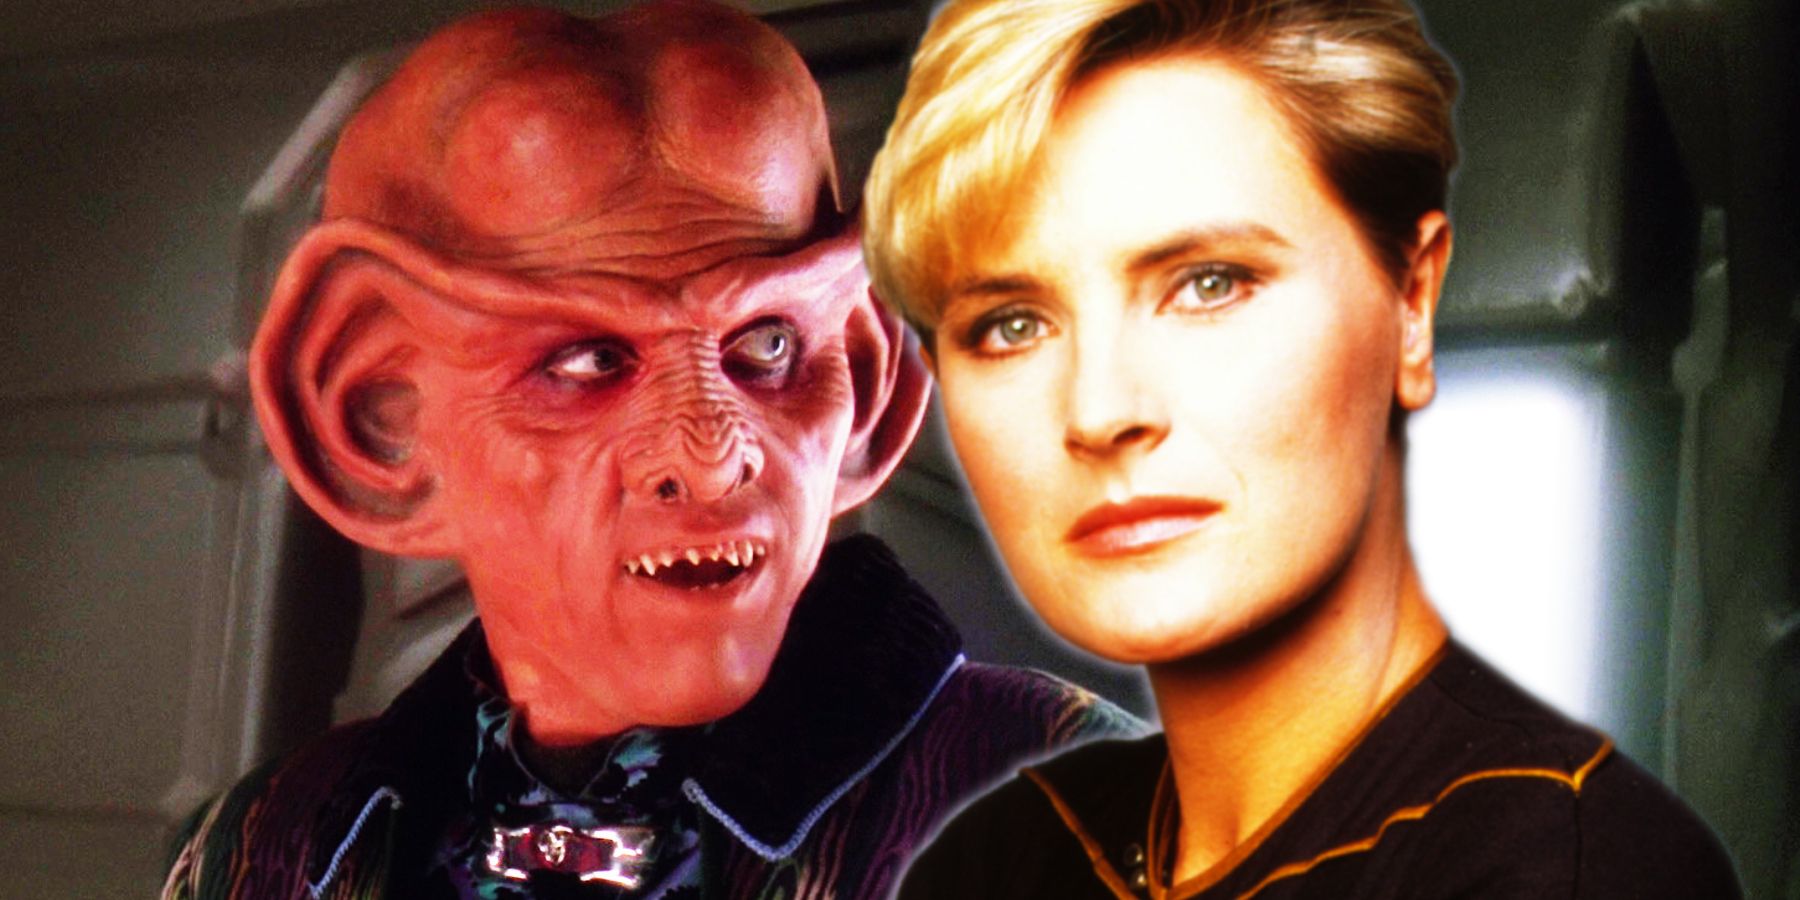 Quark from DS9 looks at Tasha Yar from TNG